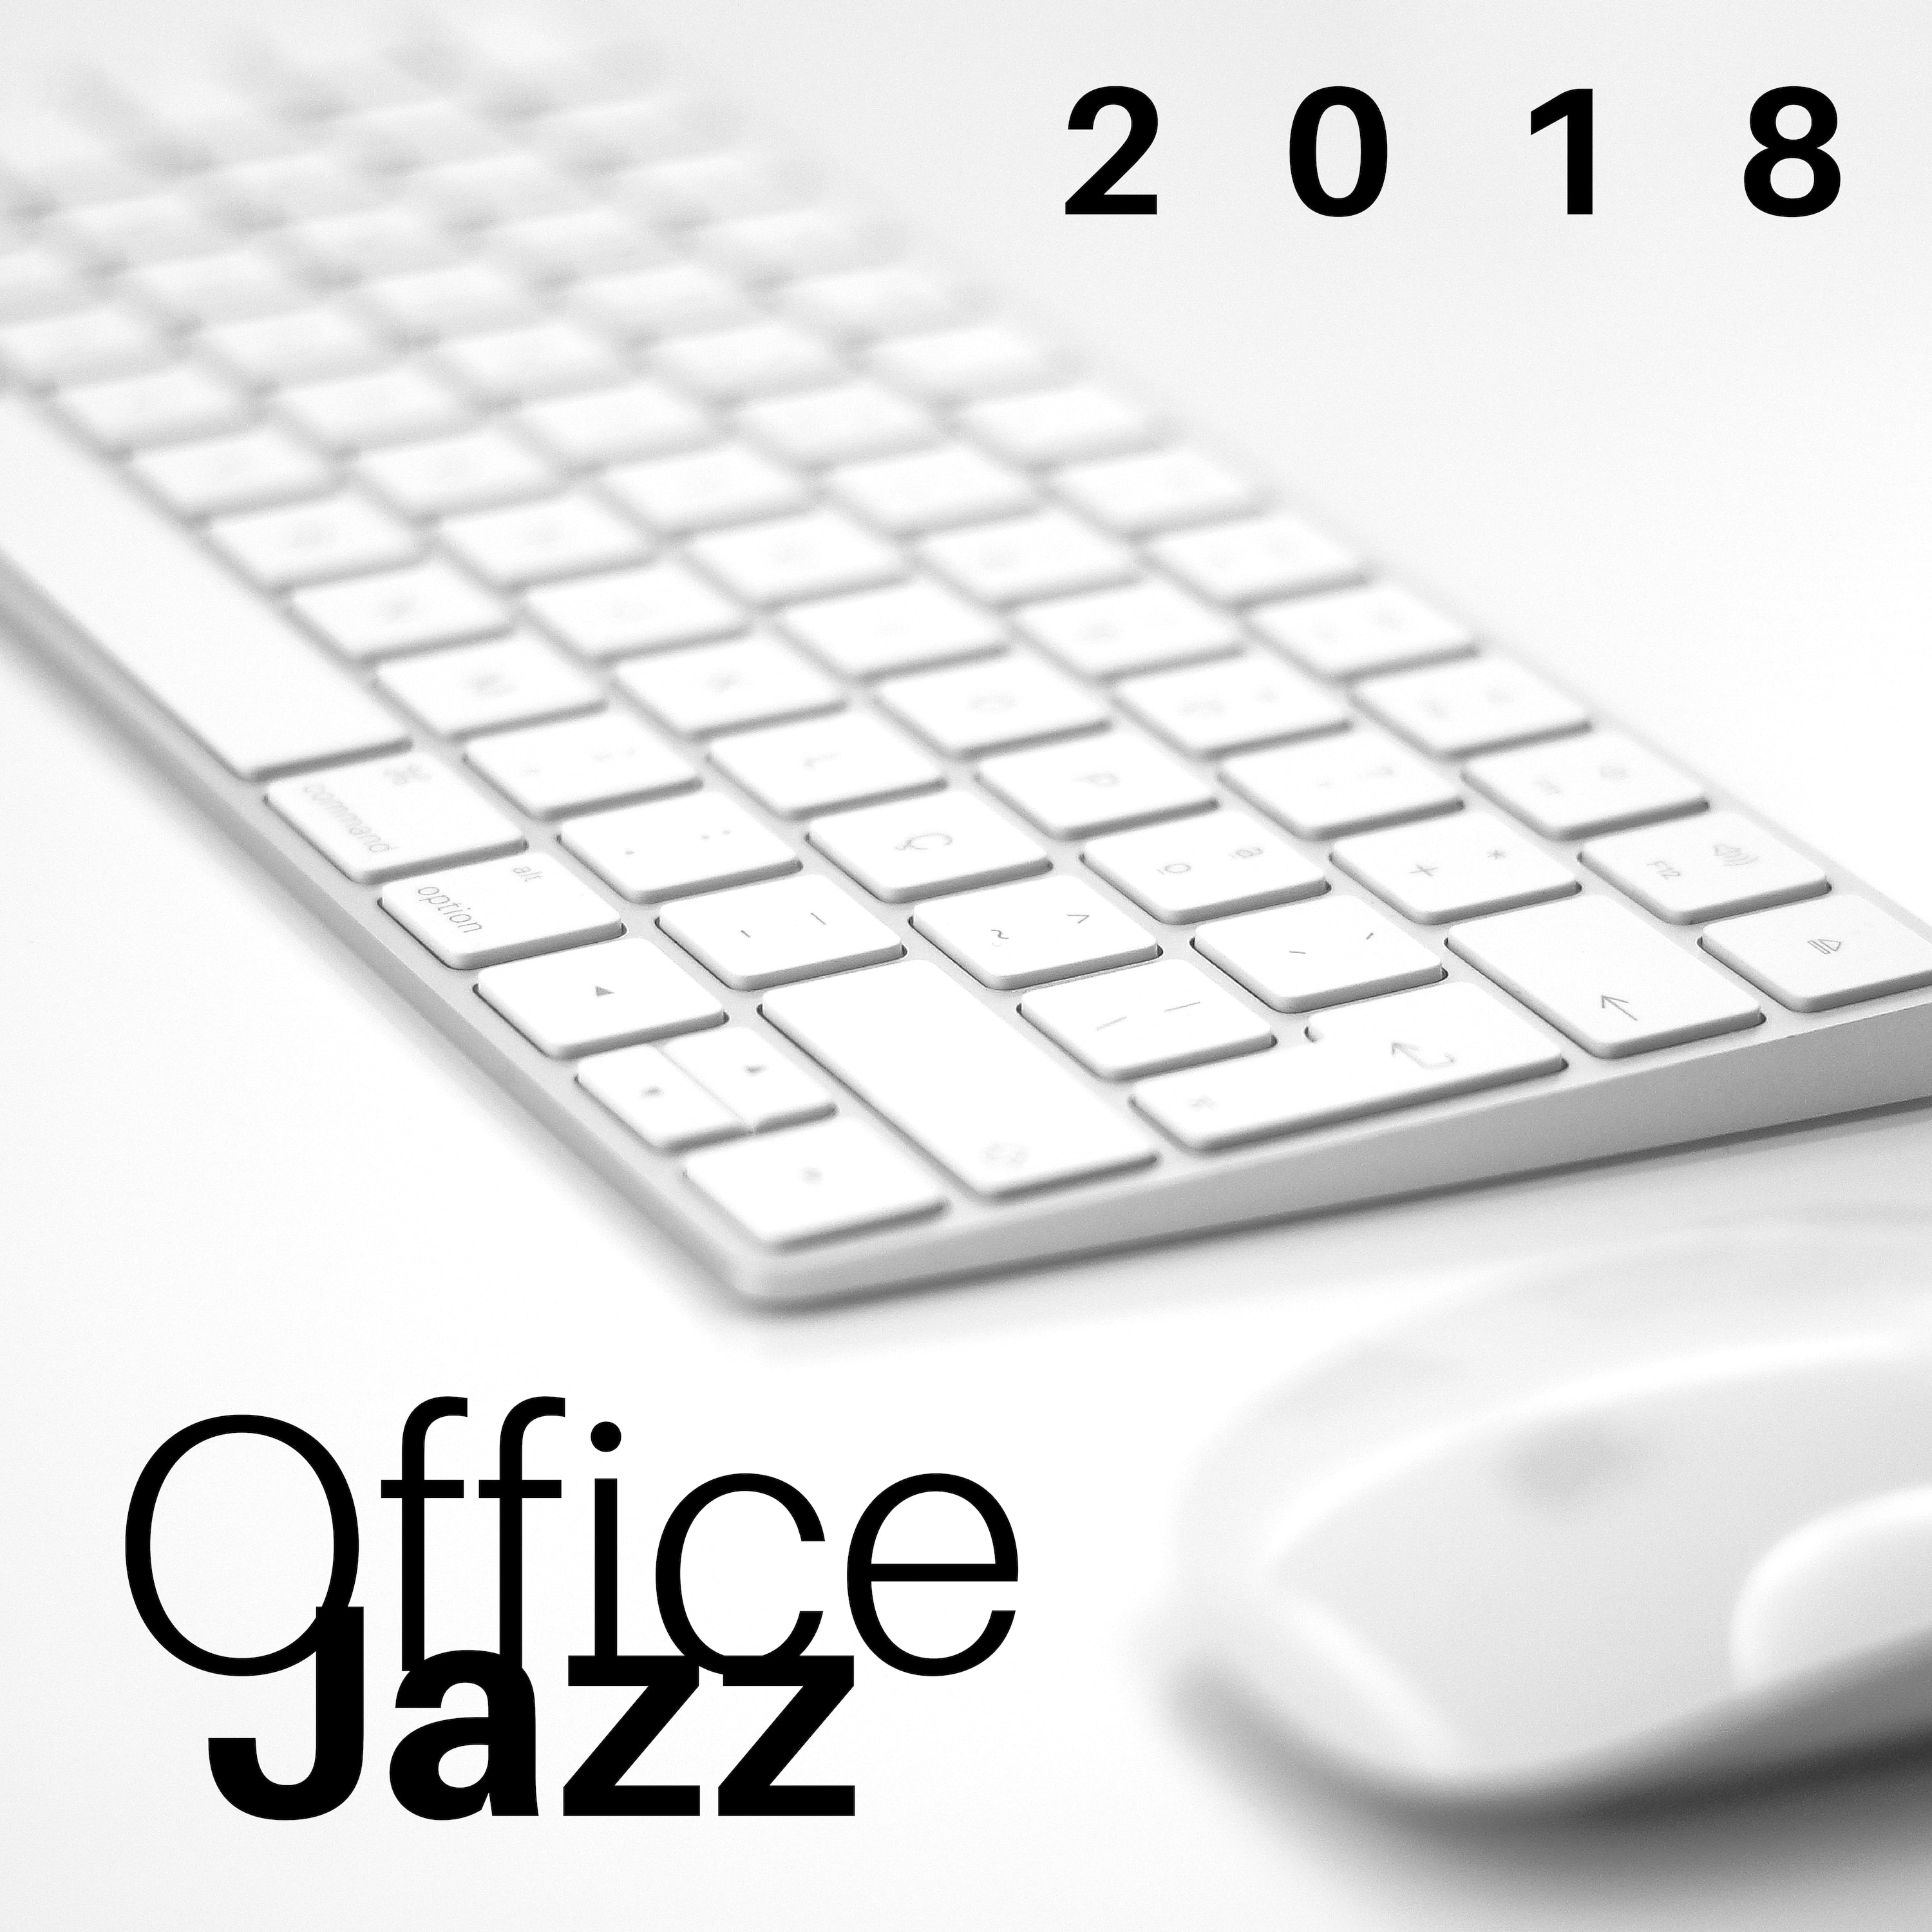 Office Jazz 2018 - The Most Relaxing Smooth Jazz Songs to Find the Perfect Concentration at Work